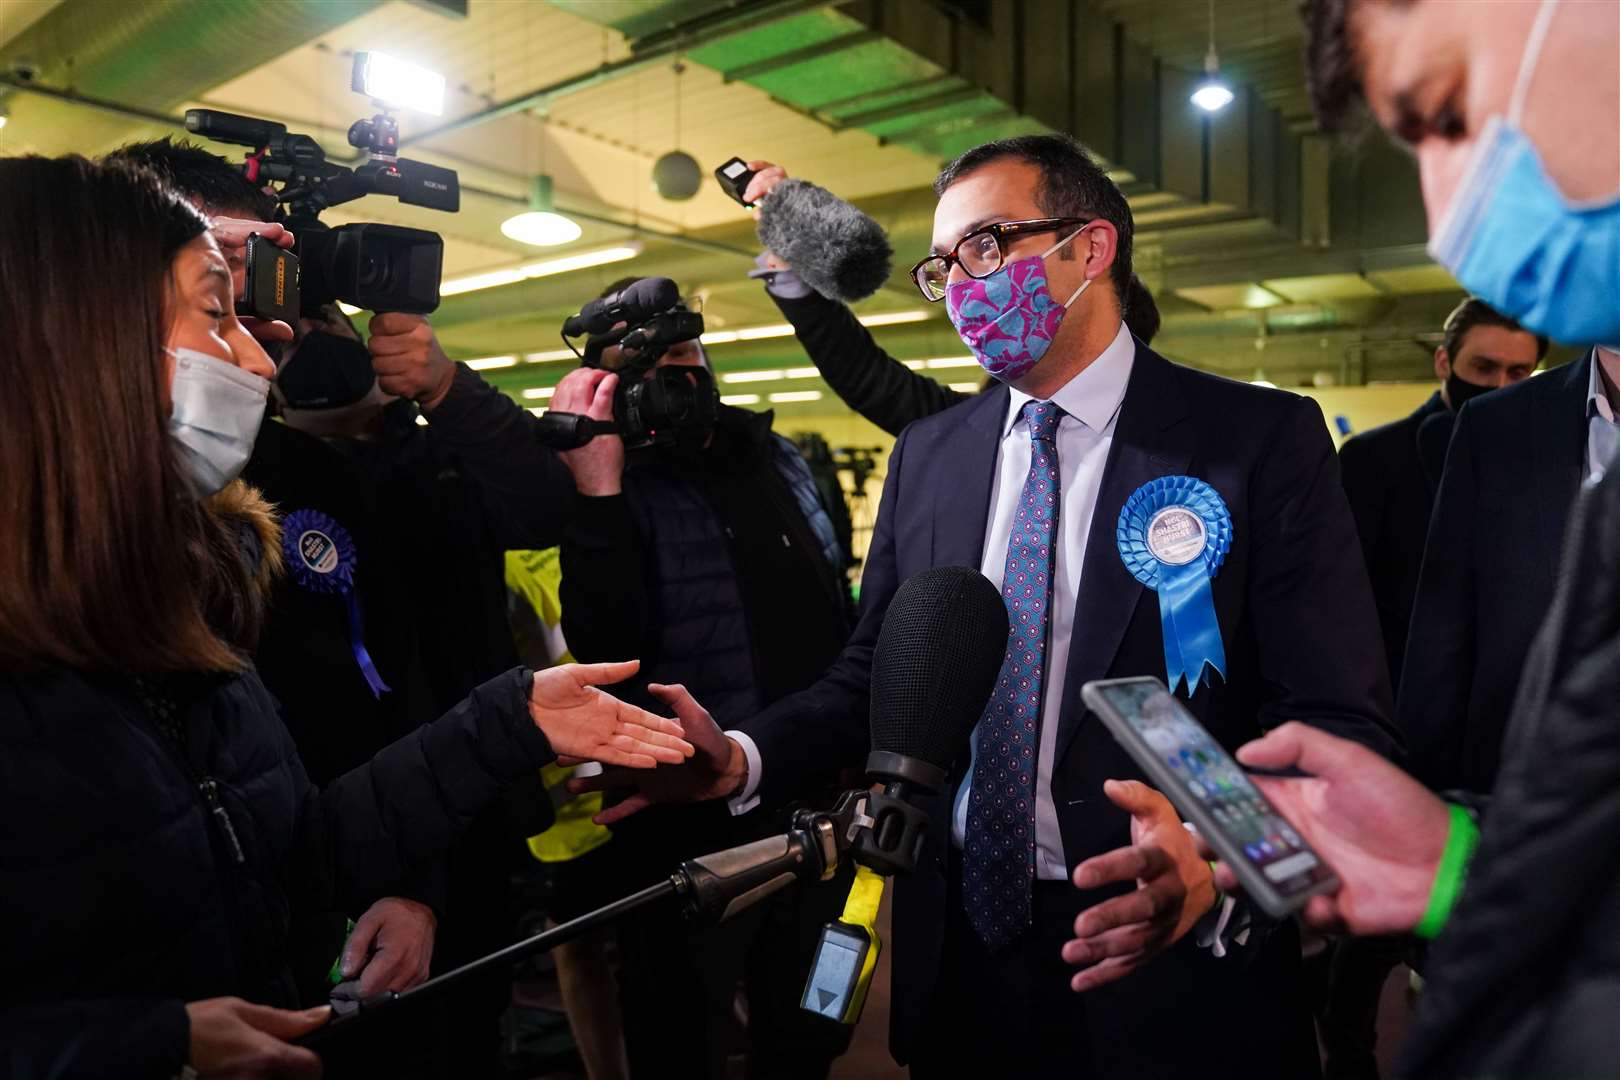 Conservative Party candidate Neil Shastri-Hurst speaks to the media after the declaration (Jacob King/PA)